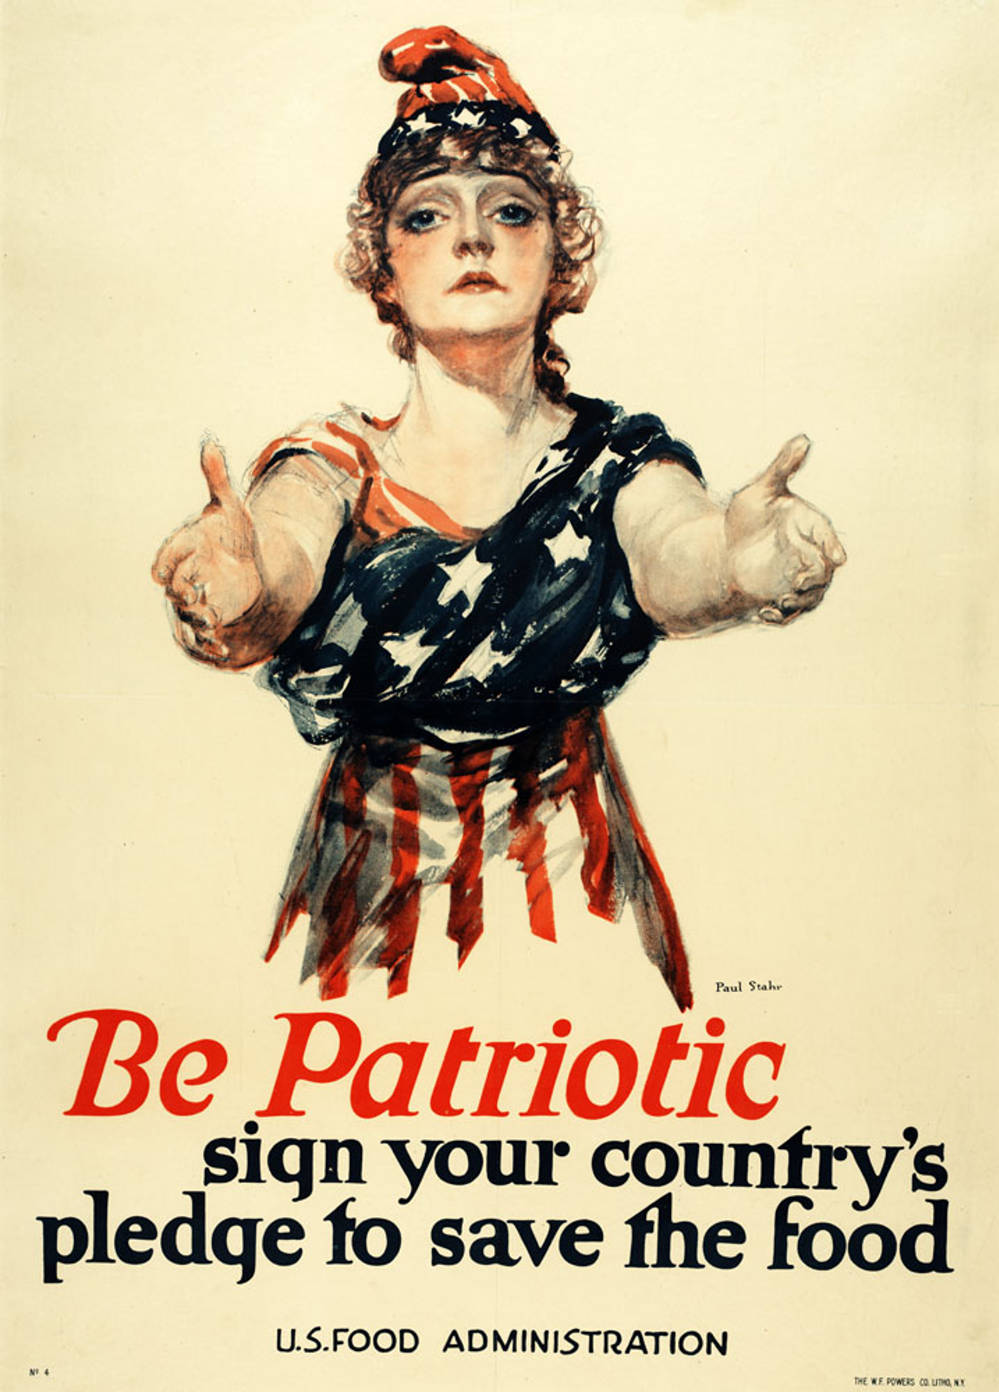 propaganda poster of a women draped in the american flag reaching out with text that says Be Patriotic sign your country's pledge to save the food from the US Food Administration